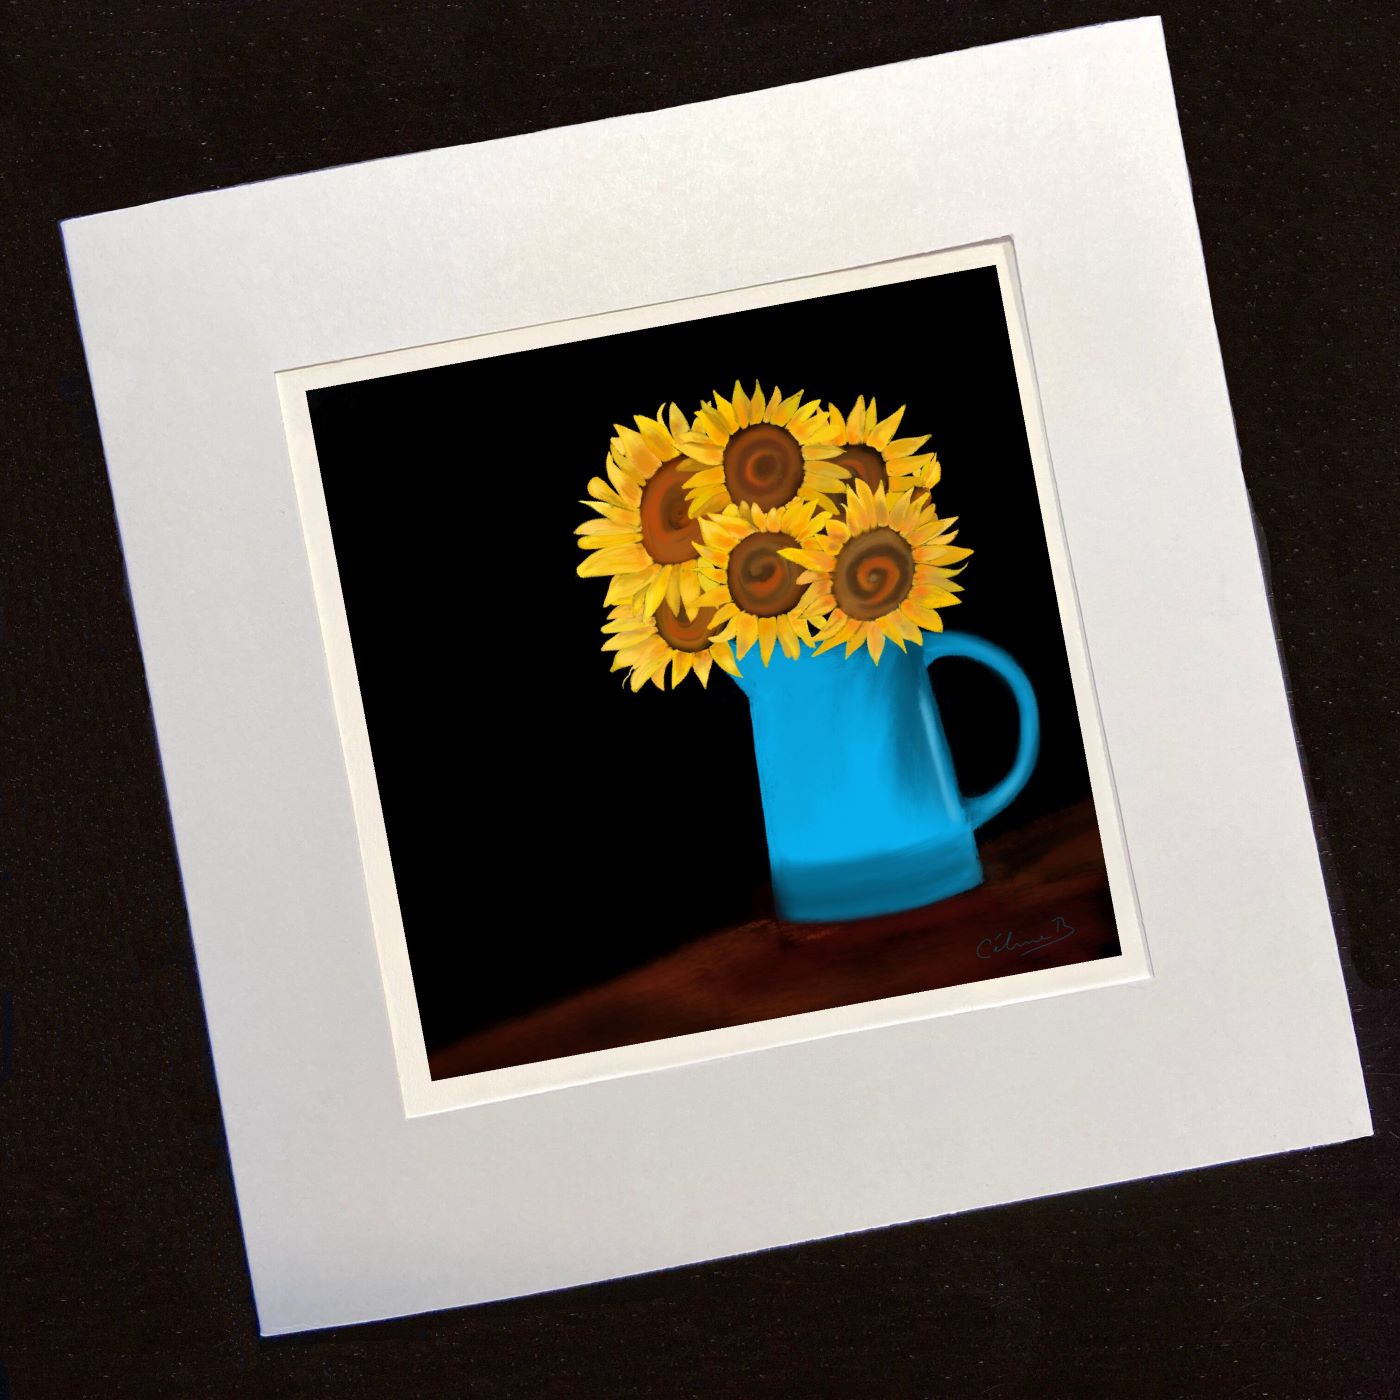 Card selection packs FLOWERS IN A VASE: 4 cards for £10 - Free P&P 8 cards +